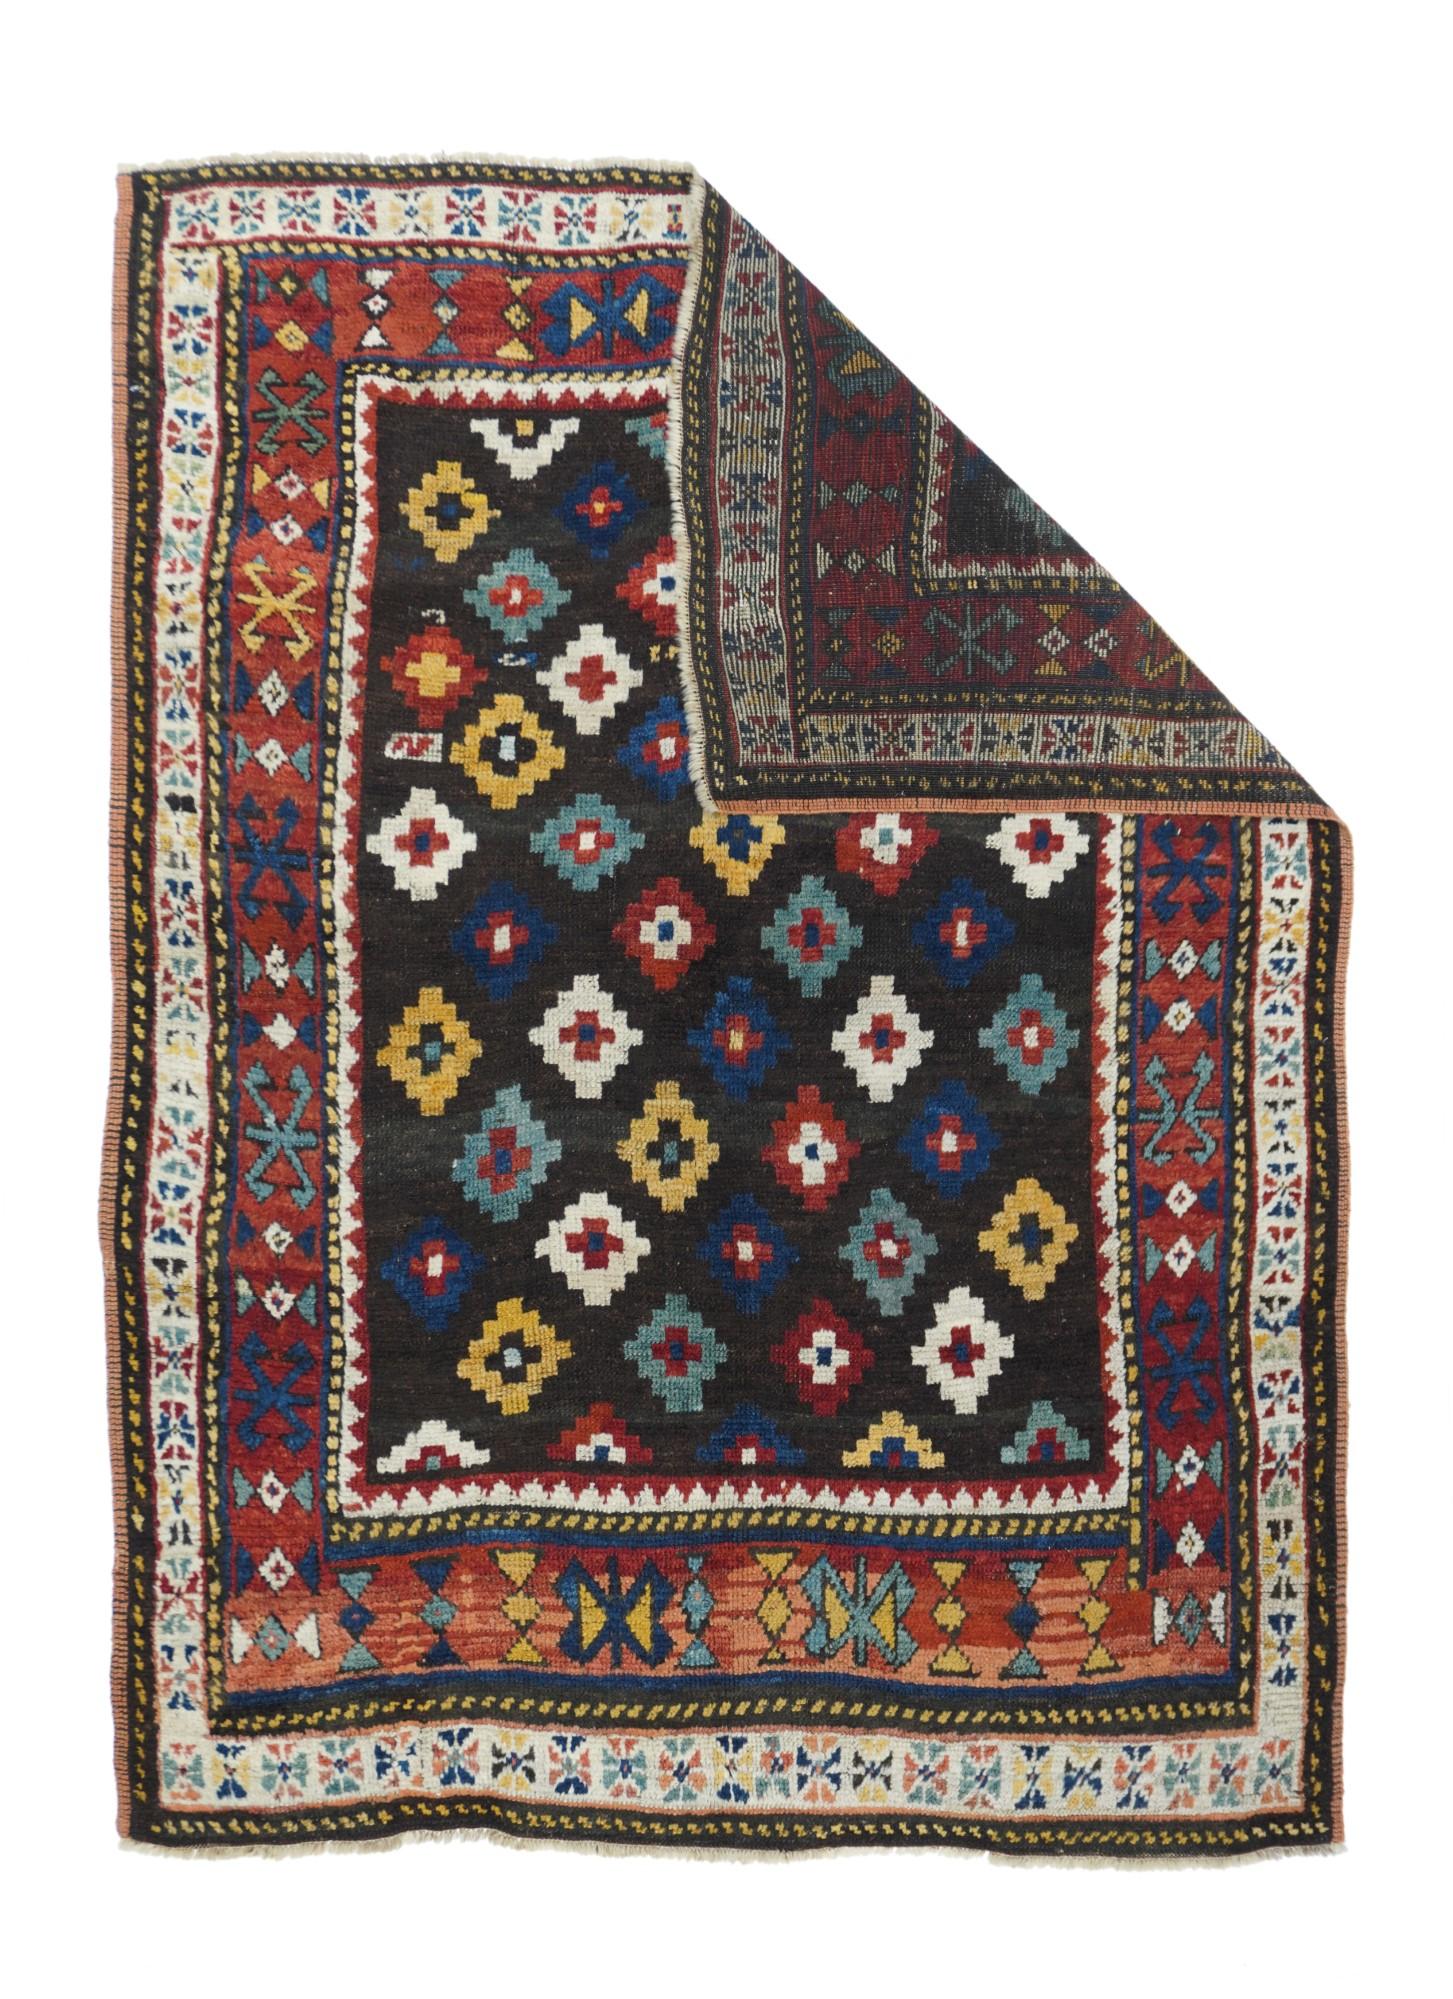 Antique Southern Caucasian Tribal Rug 4'6'' x 6'2''
An example of a recently isolated southern Caucasian type. The deep brown-red field shows rough color diagonals of stepped lozenges in green, straw, cream, rust and medium blue. Abrashed red border